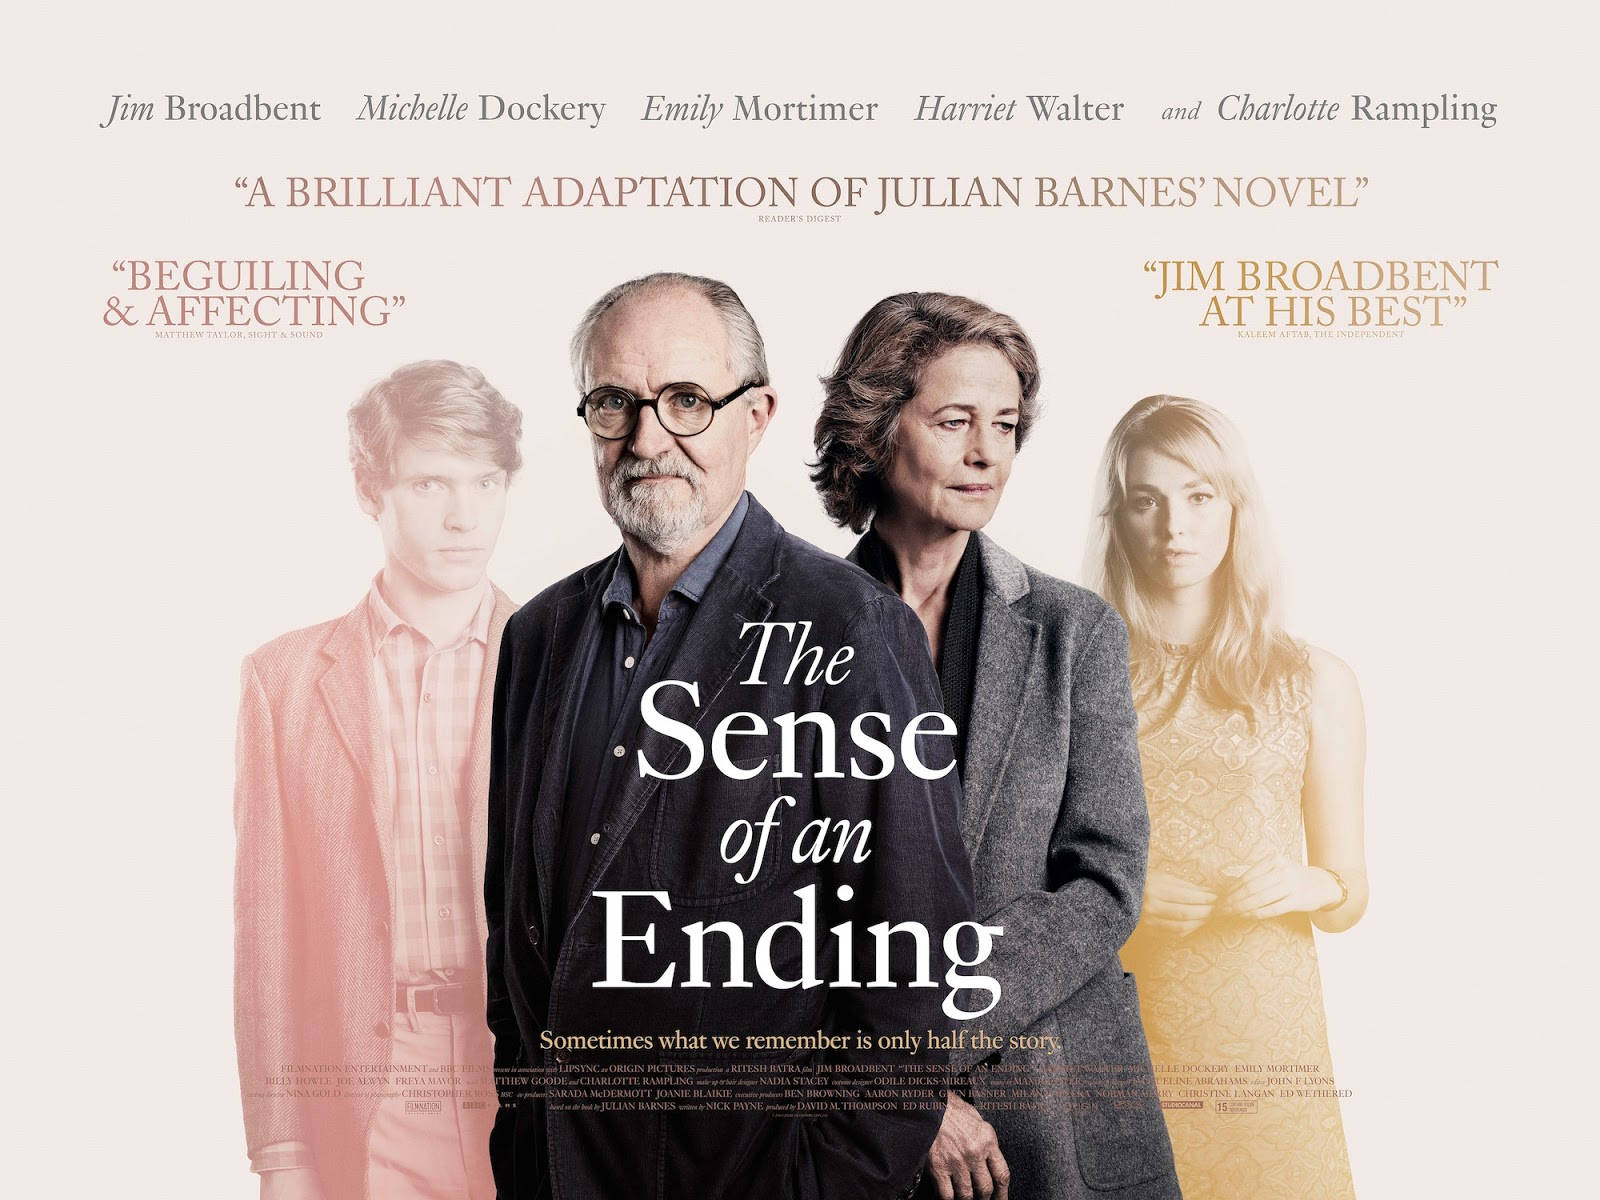 Legendary actor Jim Broadbent front and center in 'Sense of an Ending' poster. Wallpaper